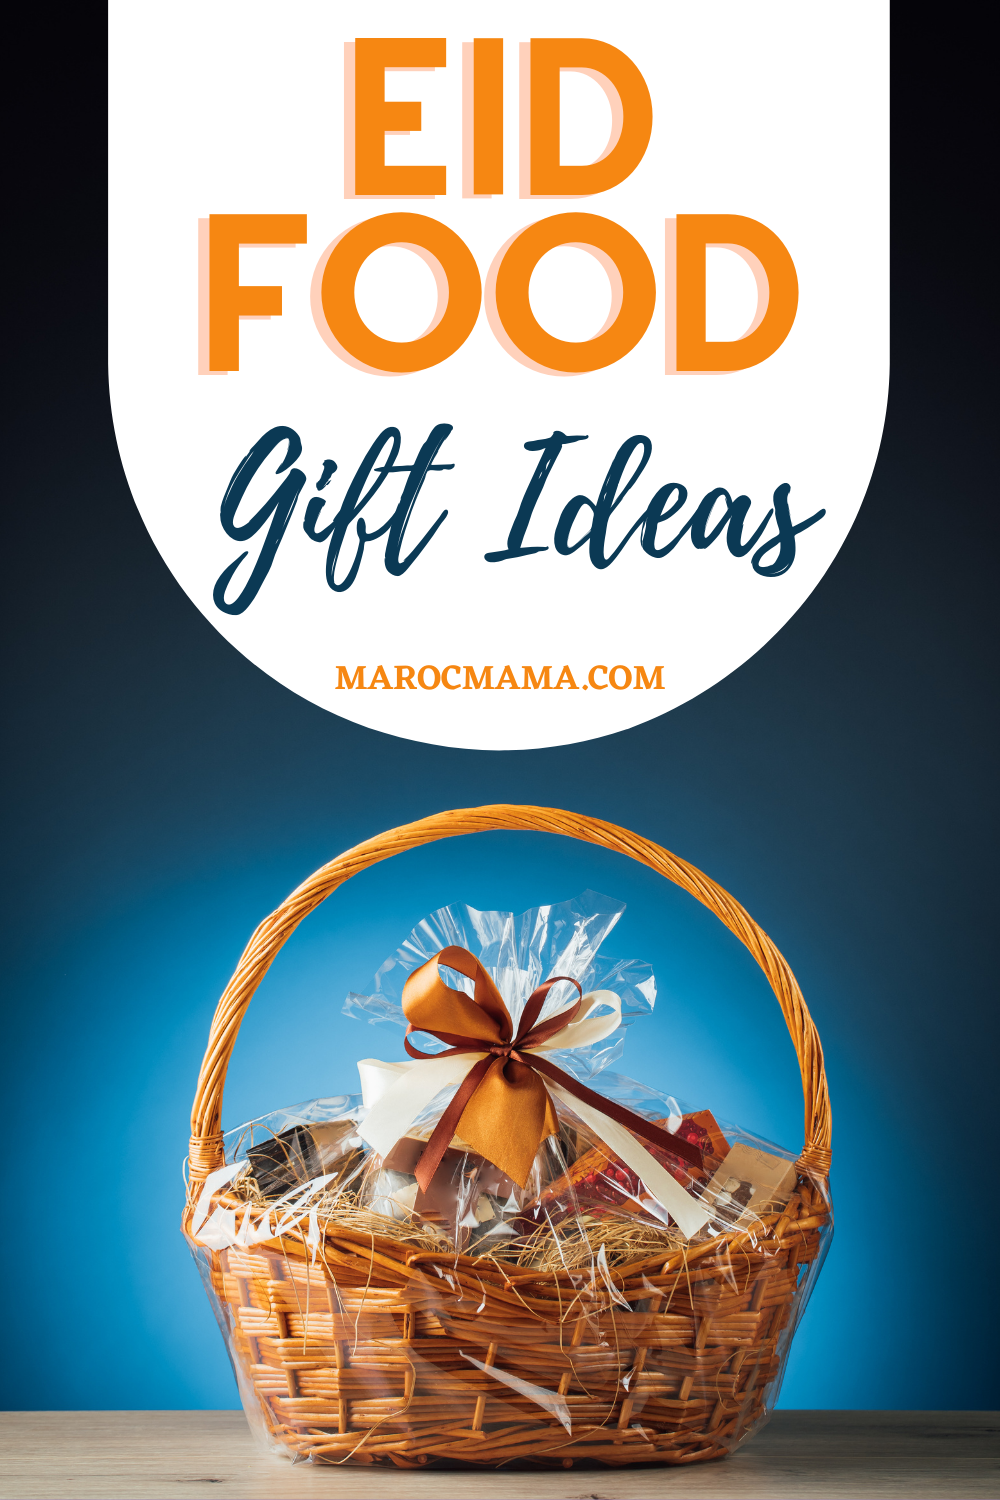 A gift basket on blue background with the text Eid Food Gift Ideas